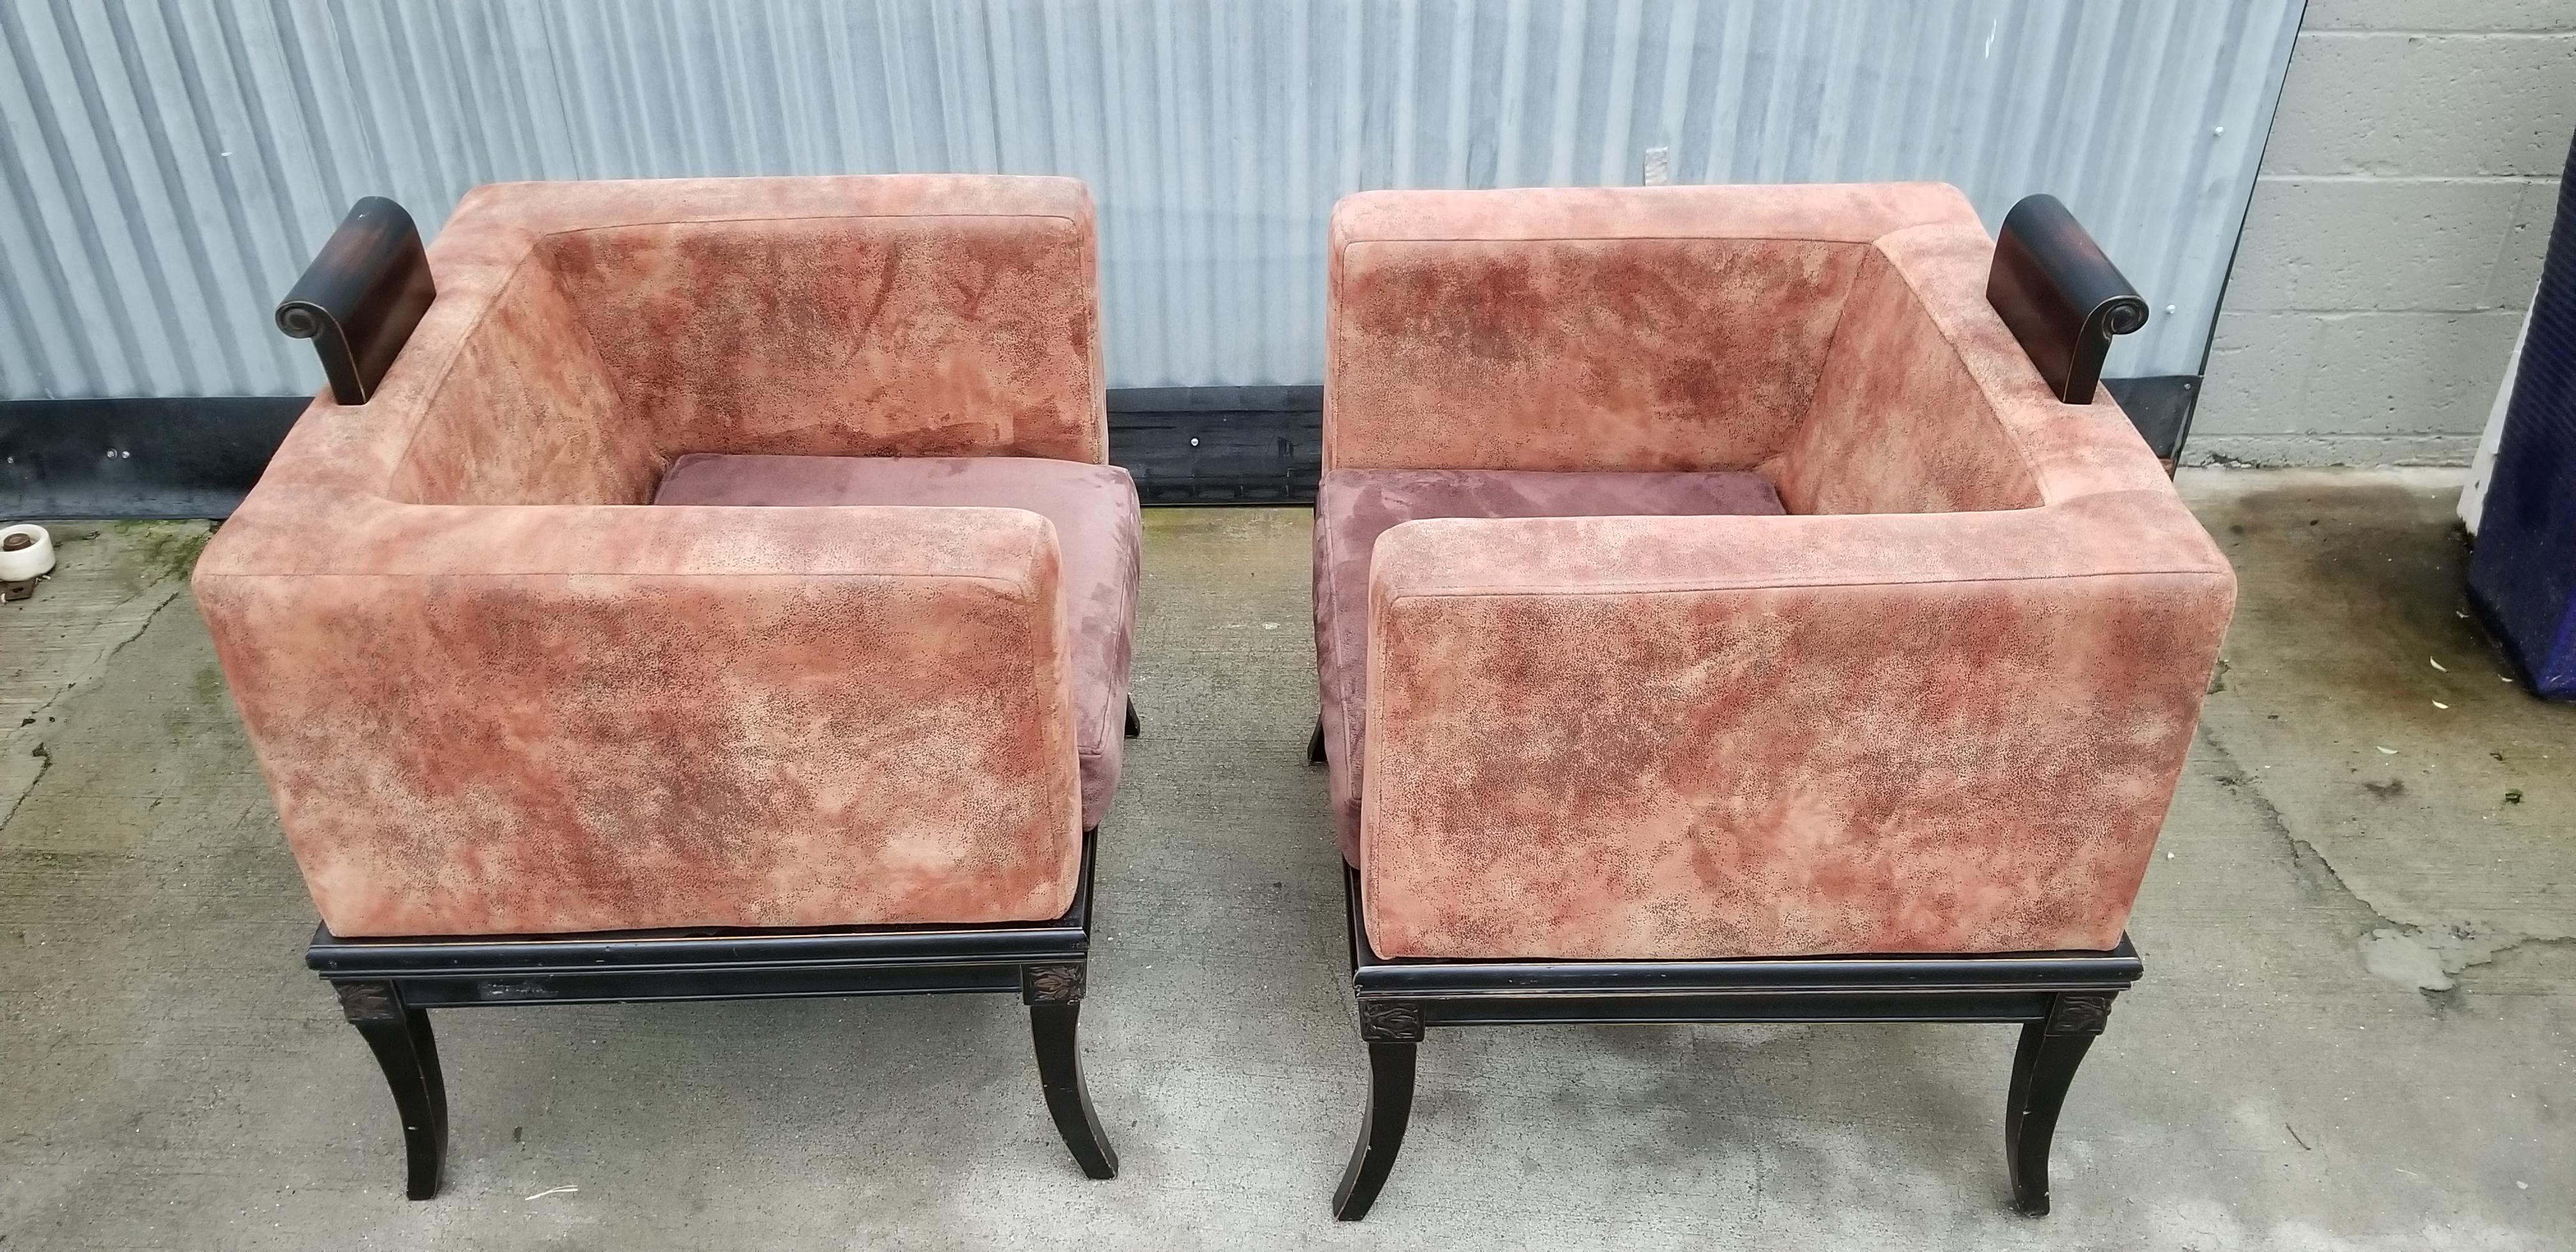 A unique pair of micro-suede mid-20th century club chairs. Hardwood ebony frames with elegant klismos design. Modern cube form chairs with Asian and Greek influence implicative of James Mont or Billy Haines. Fine craftsmanship, structurally solid